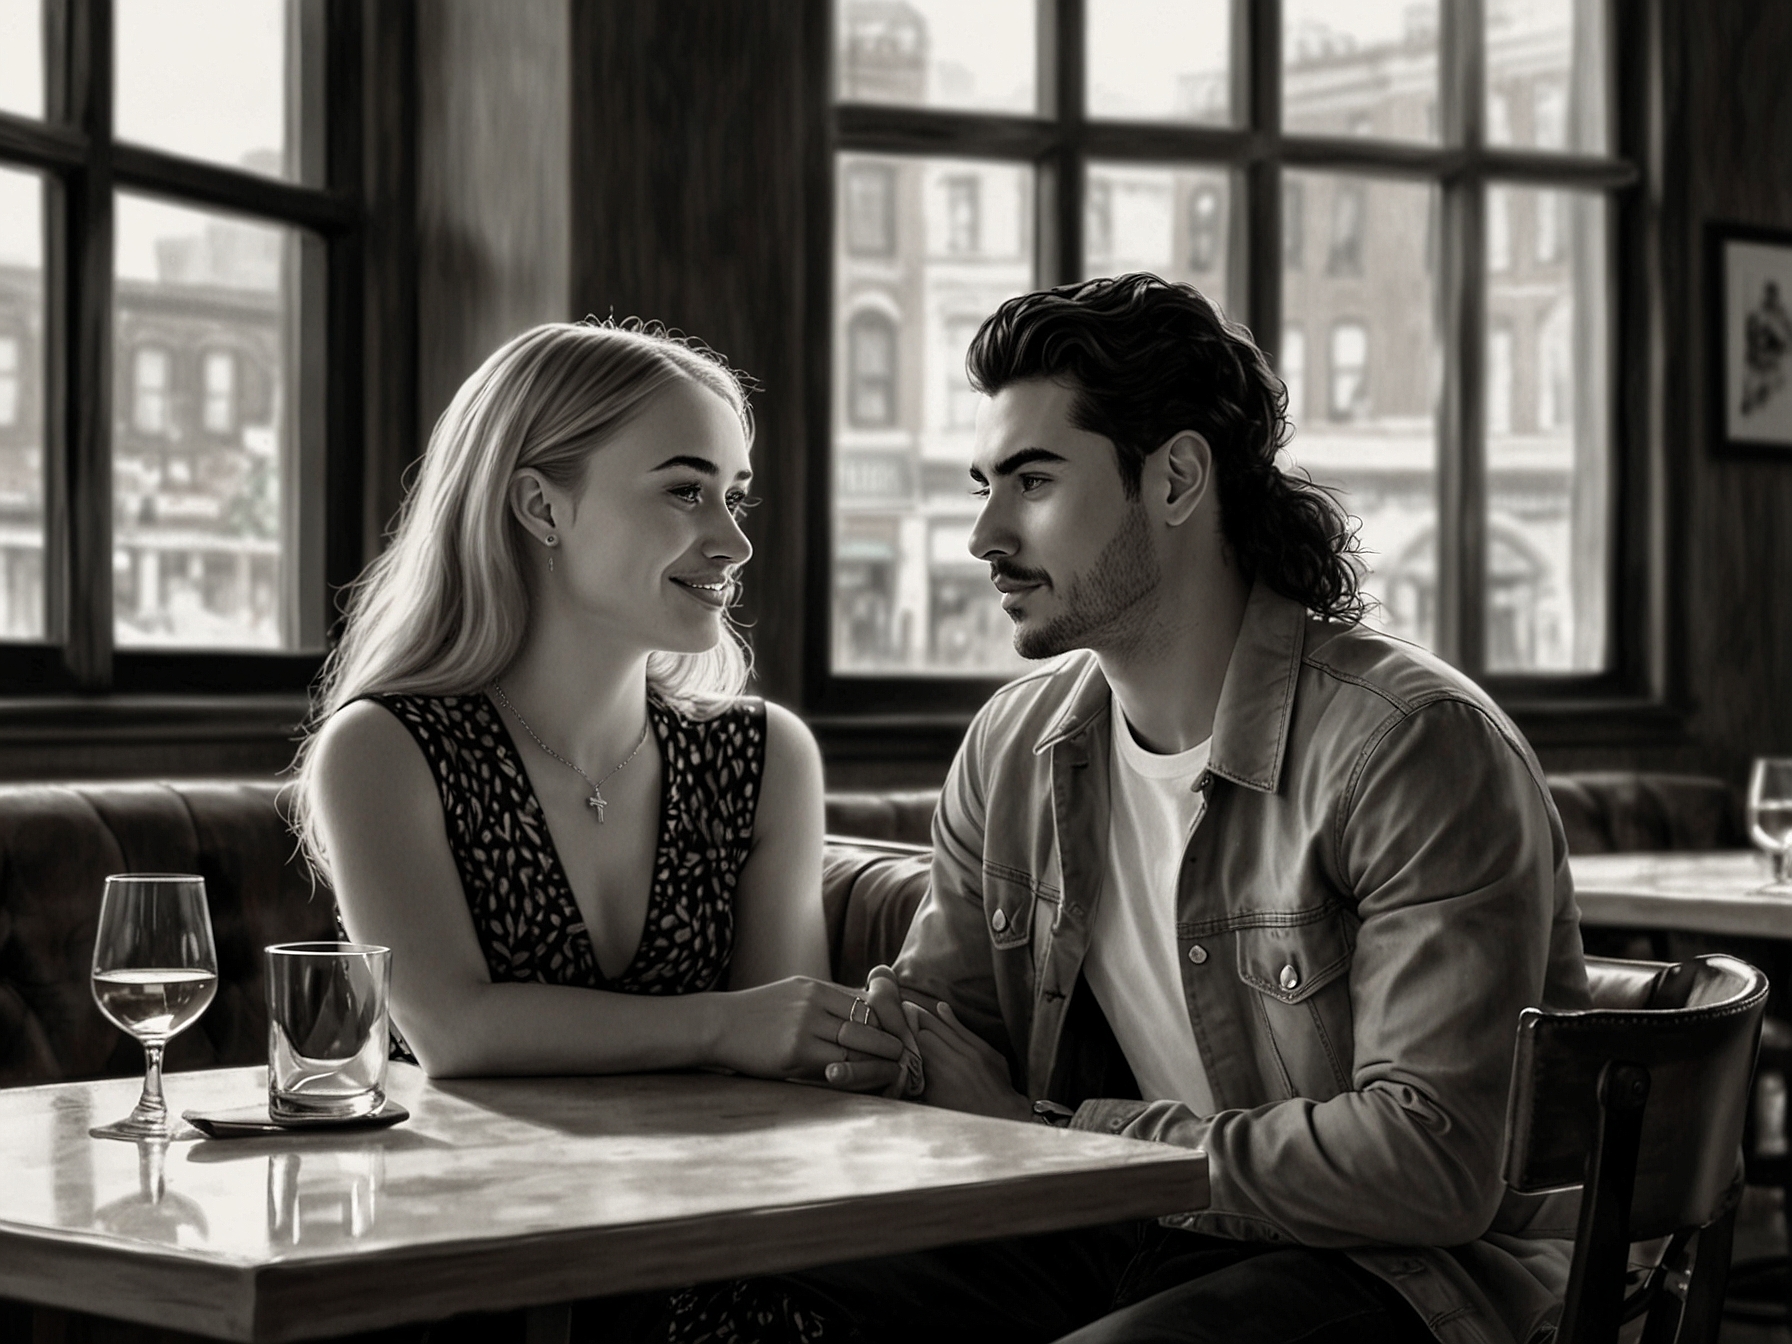 Sophie Turner and Joe Jonas spotted at an upscale Manhattan restaurant, engaged in friendly conversation, showcasing their efforts to maintain civility post-divorce.